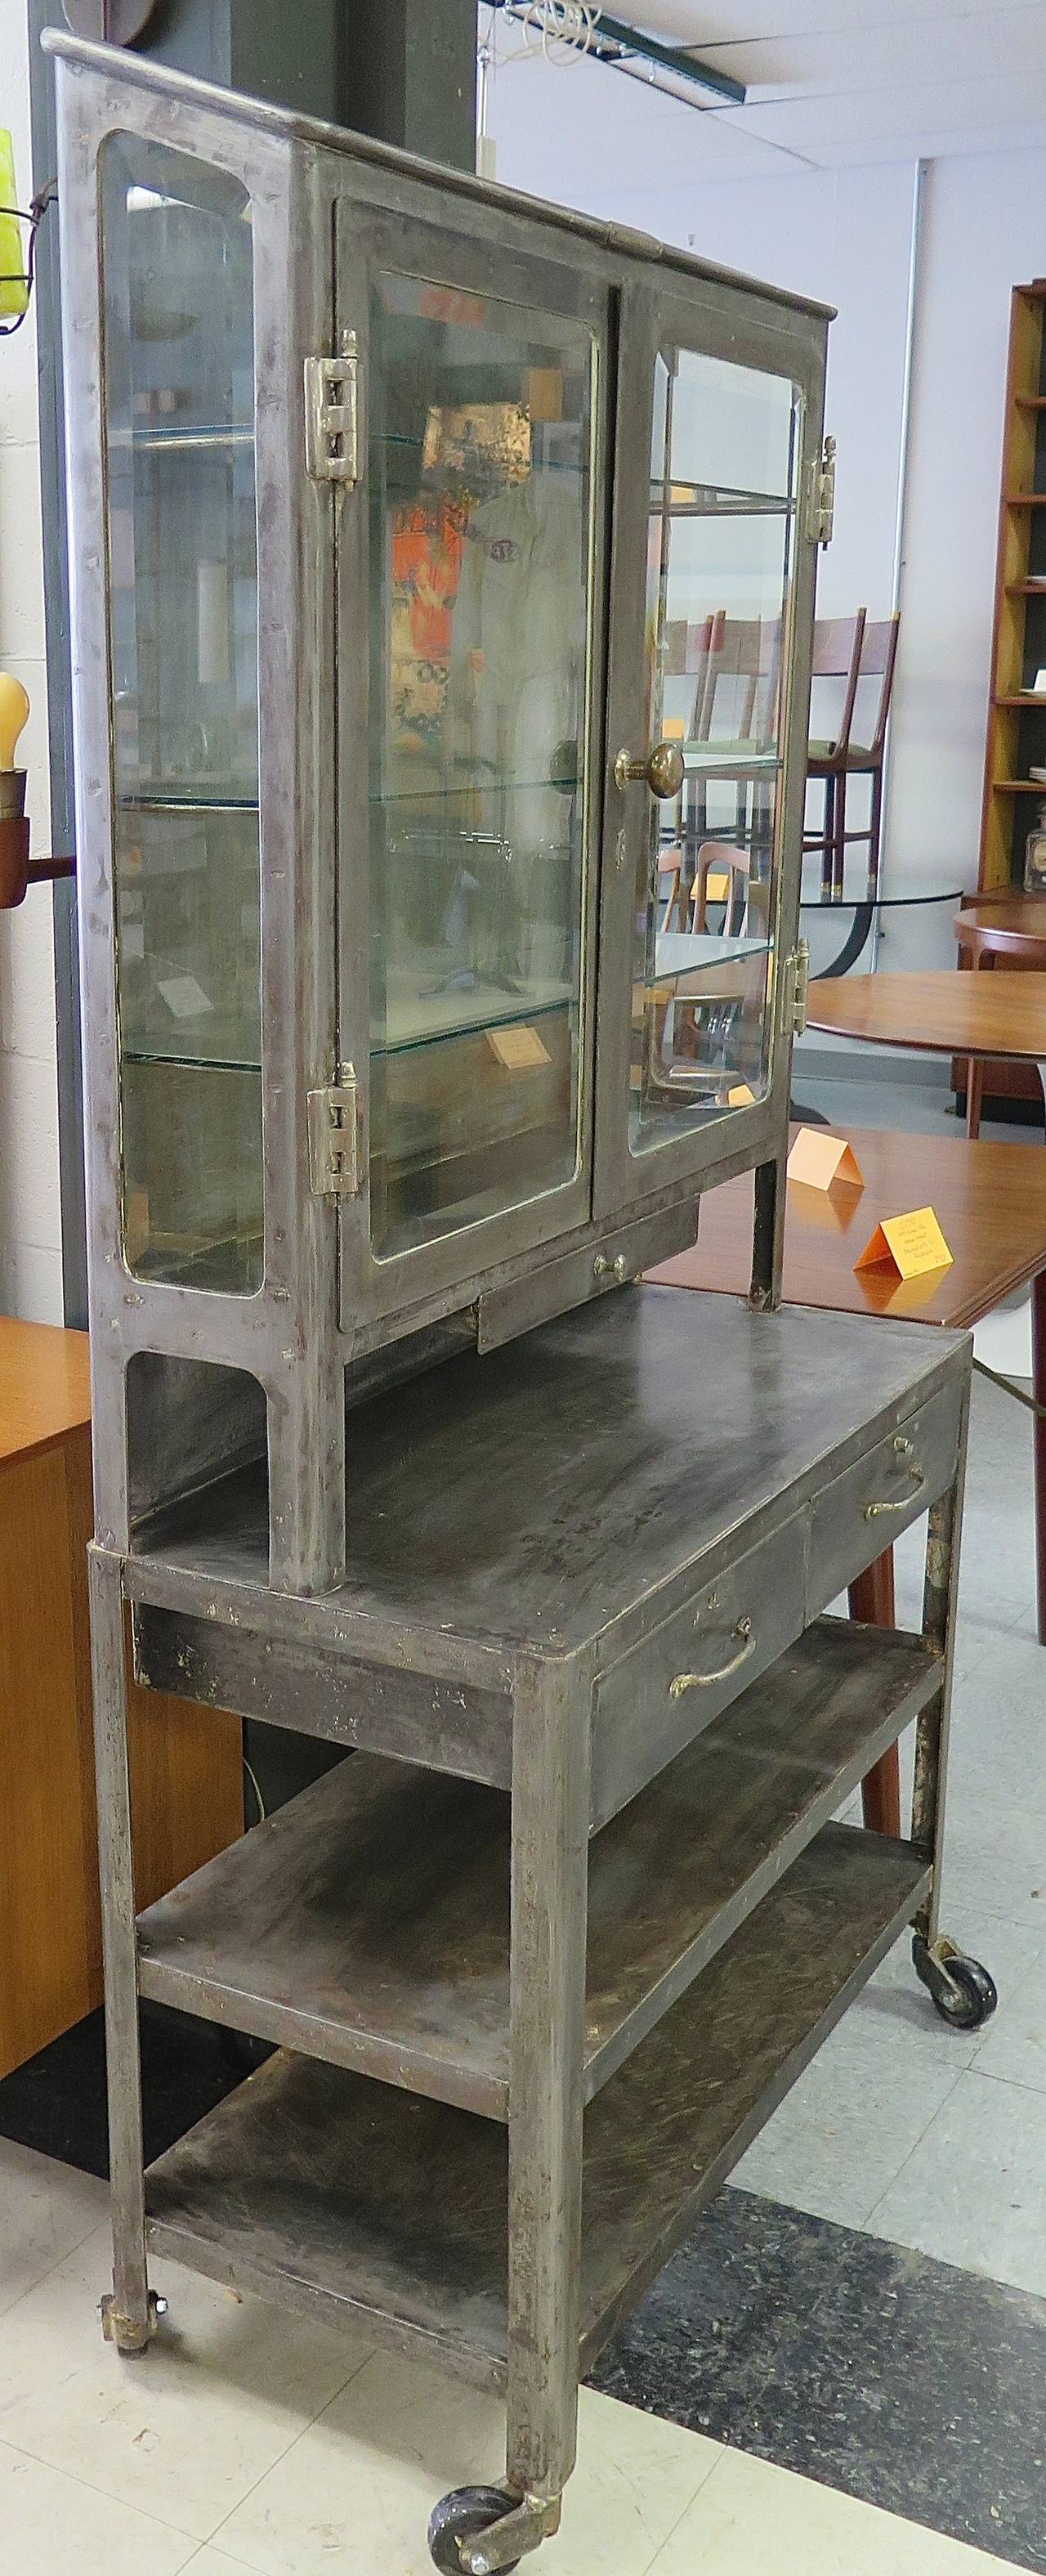 American Phenomenal 1940s Medical Cabinet with Nickel Hardware